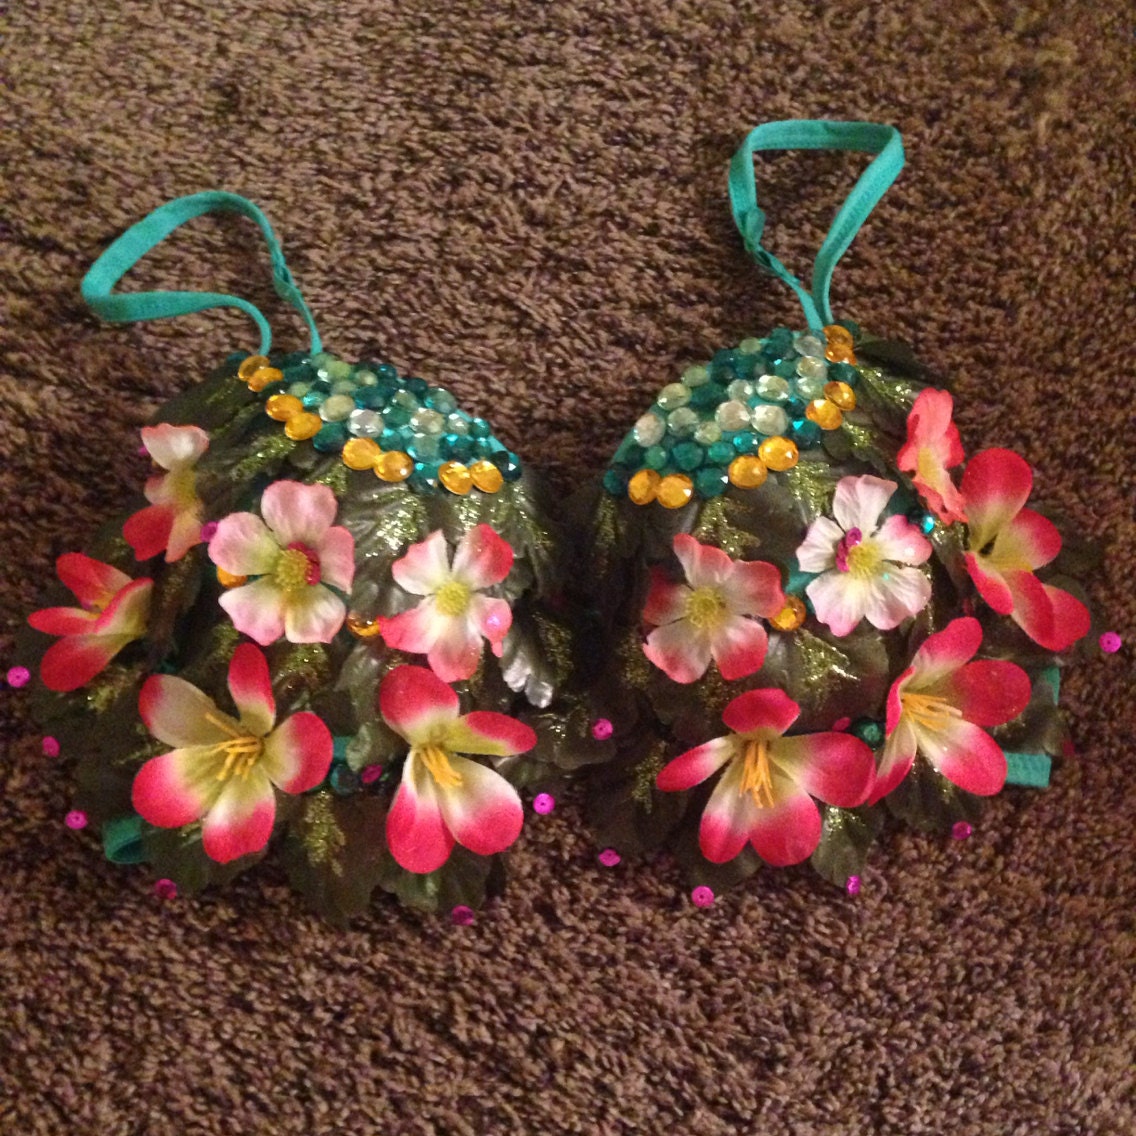 Natures rave bra perfect for edc 